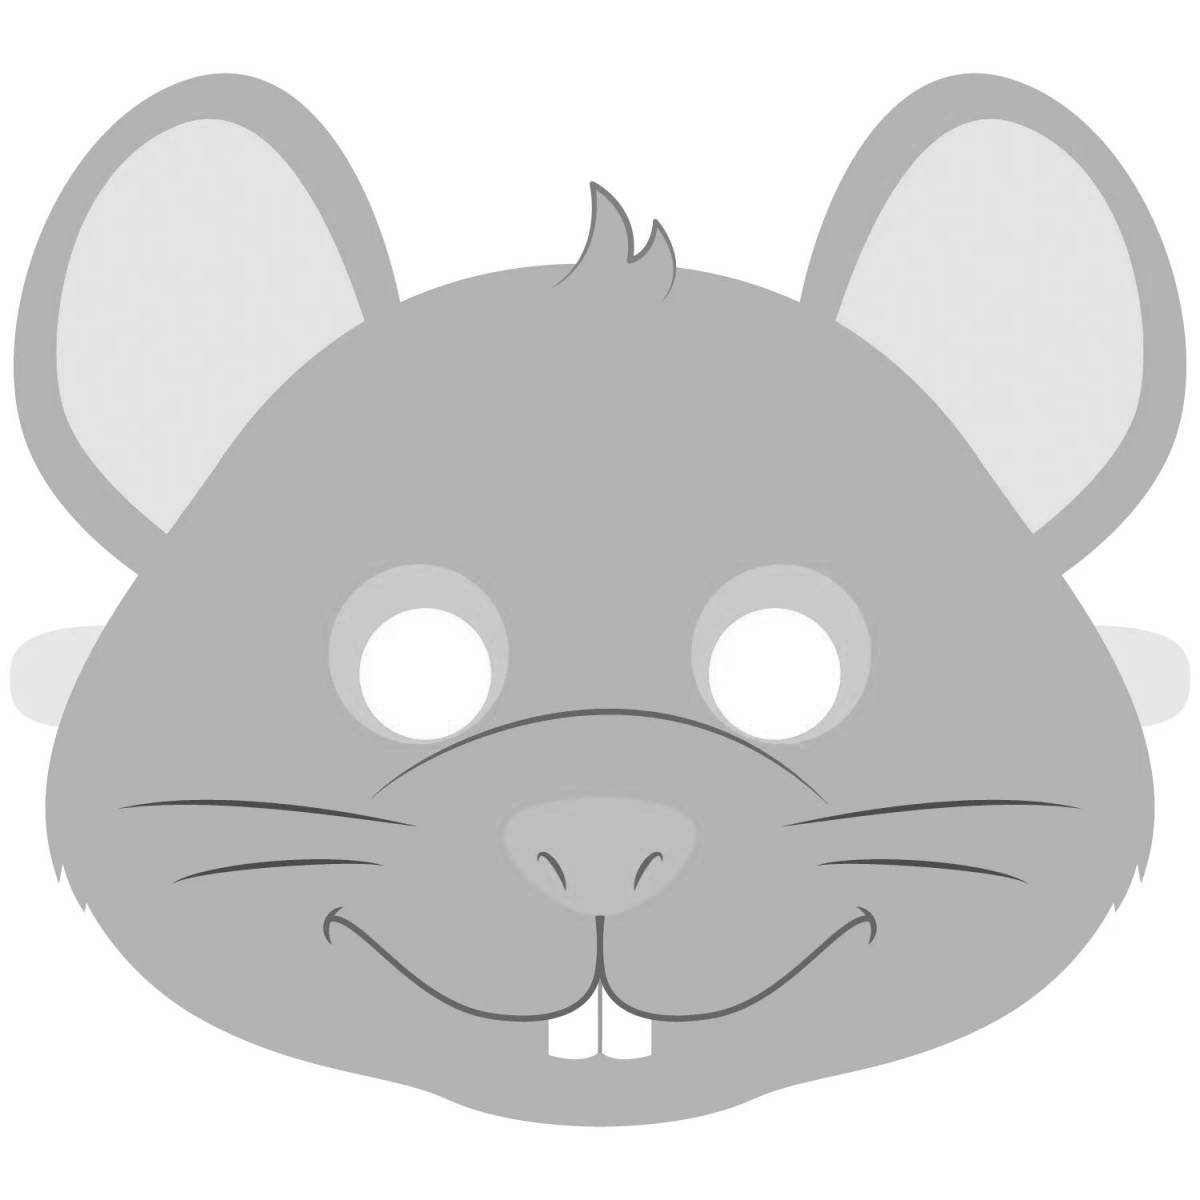 Coloring book shining mouse head